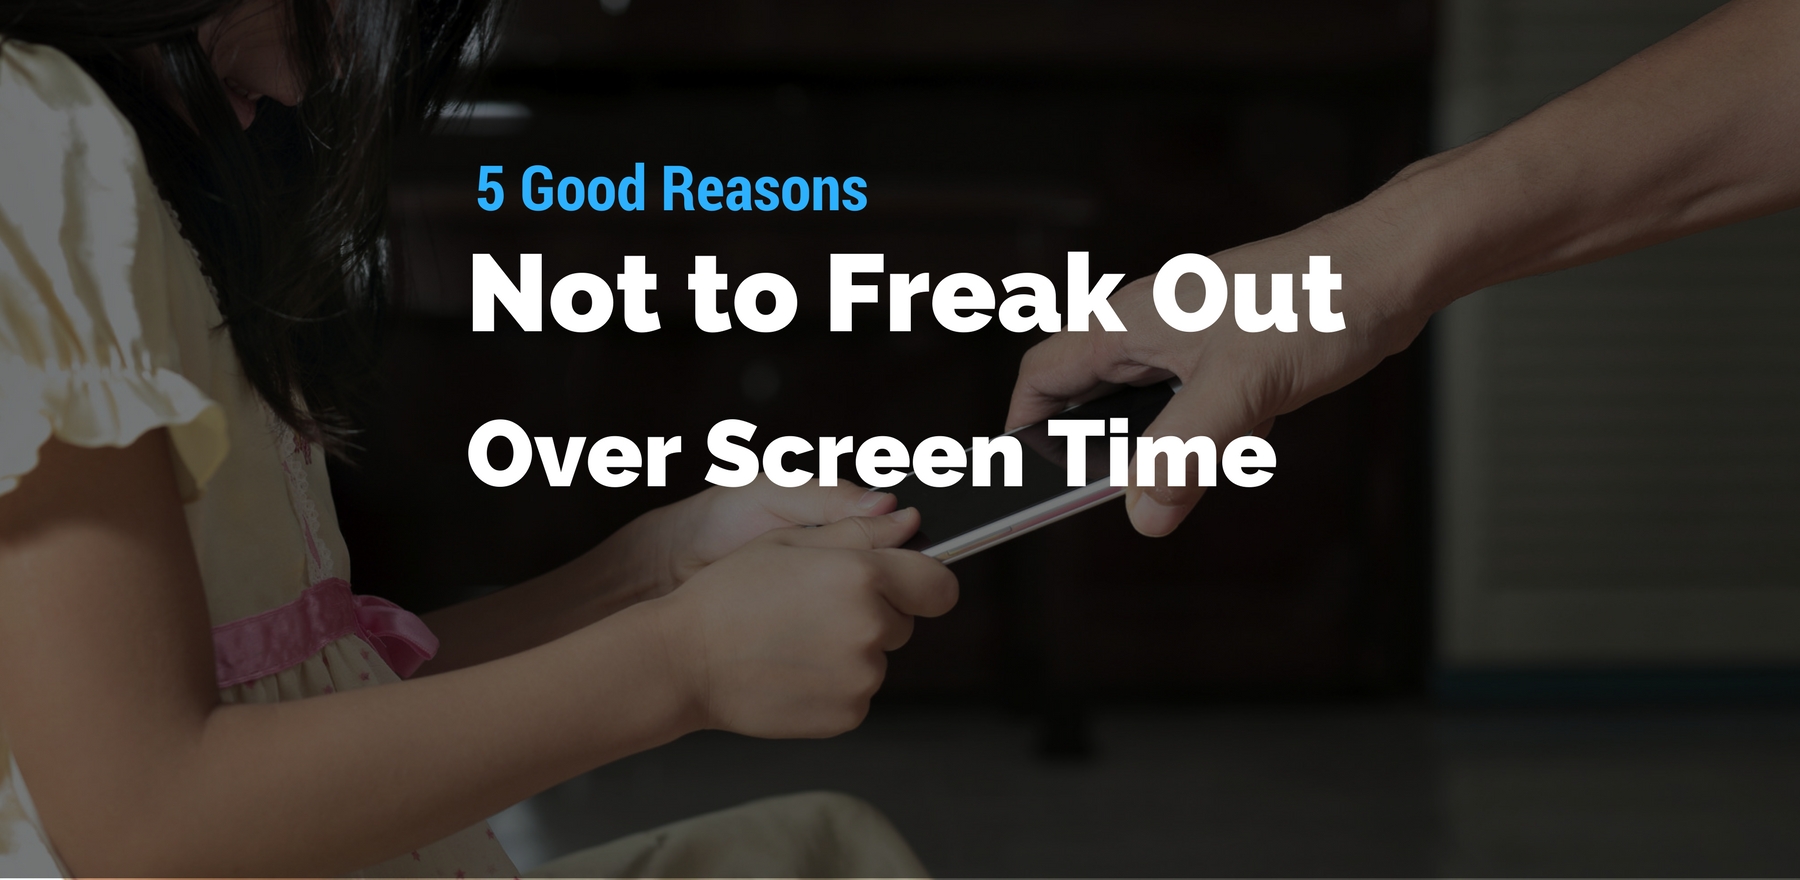 Screen Time is great